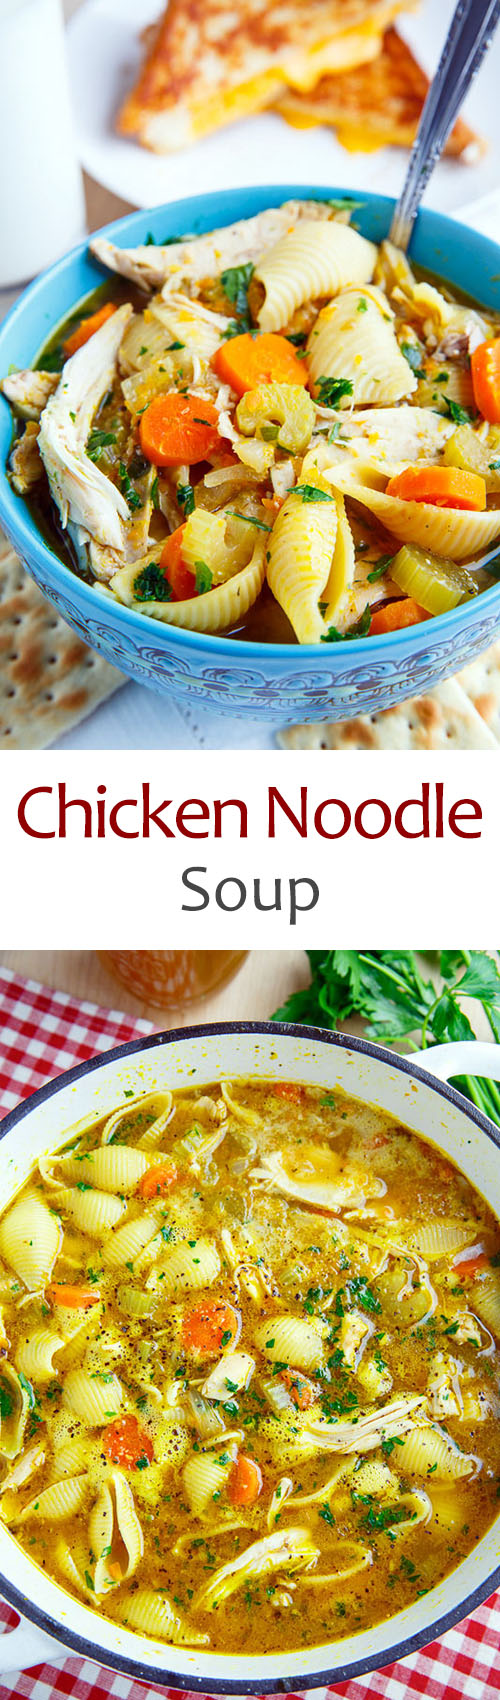 Chicken Noodle Soup Recipe on Closet Cooking